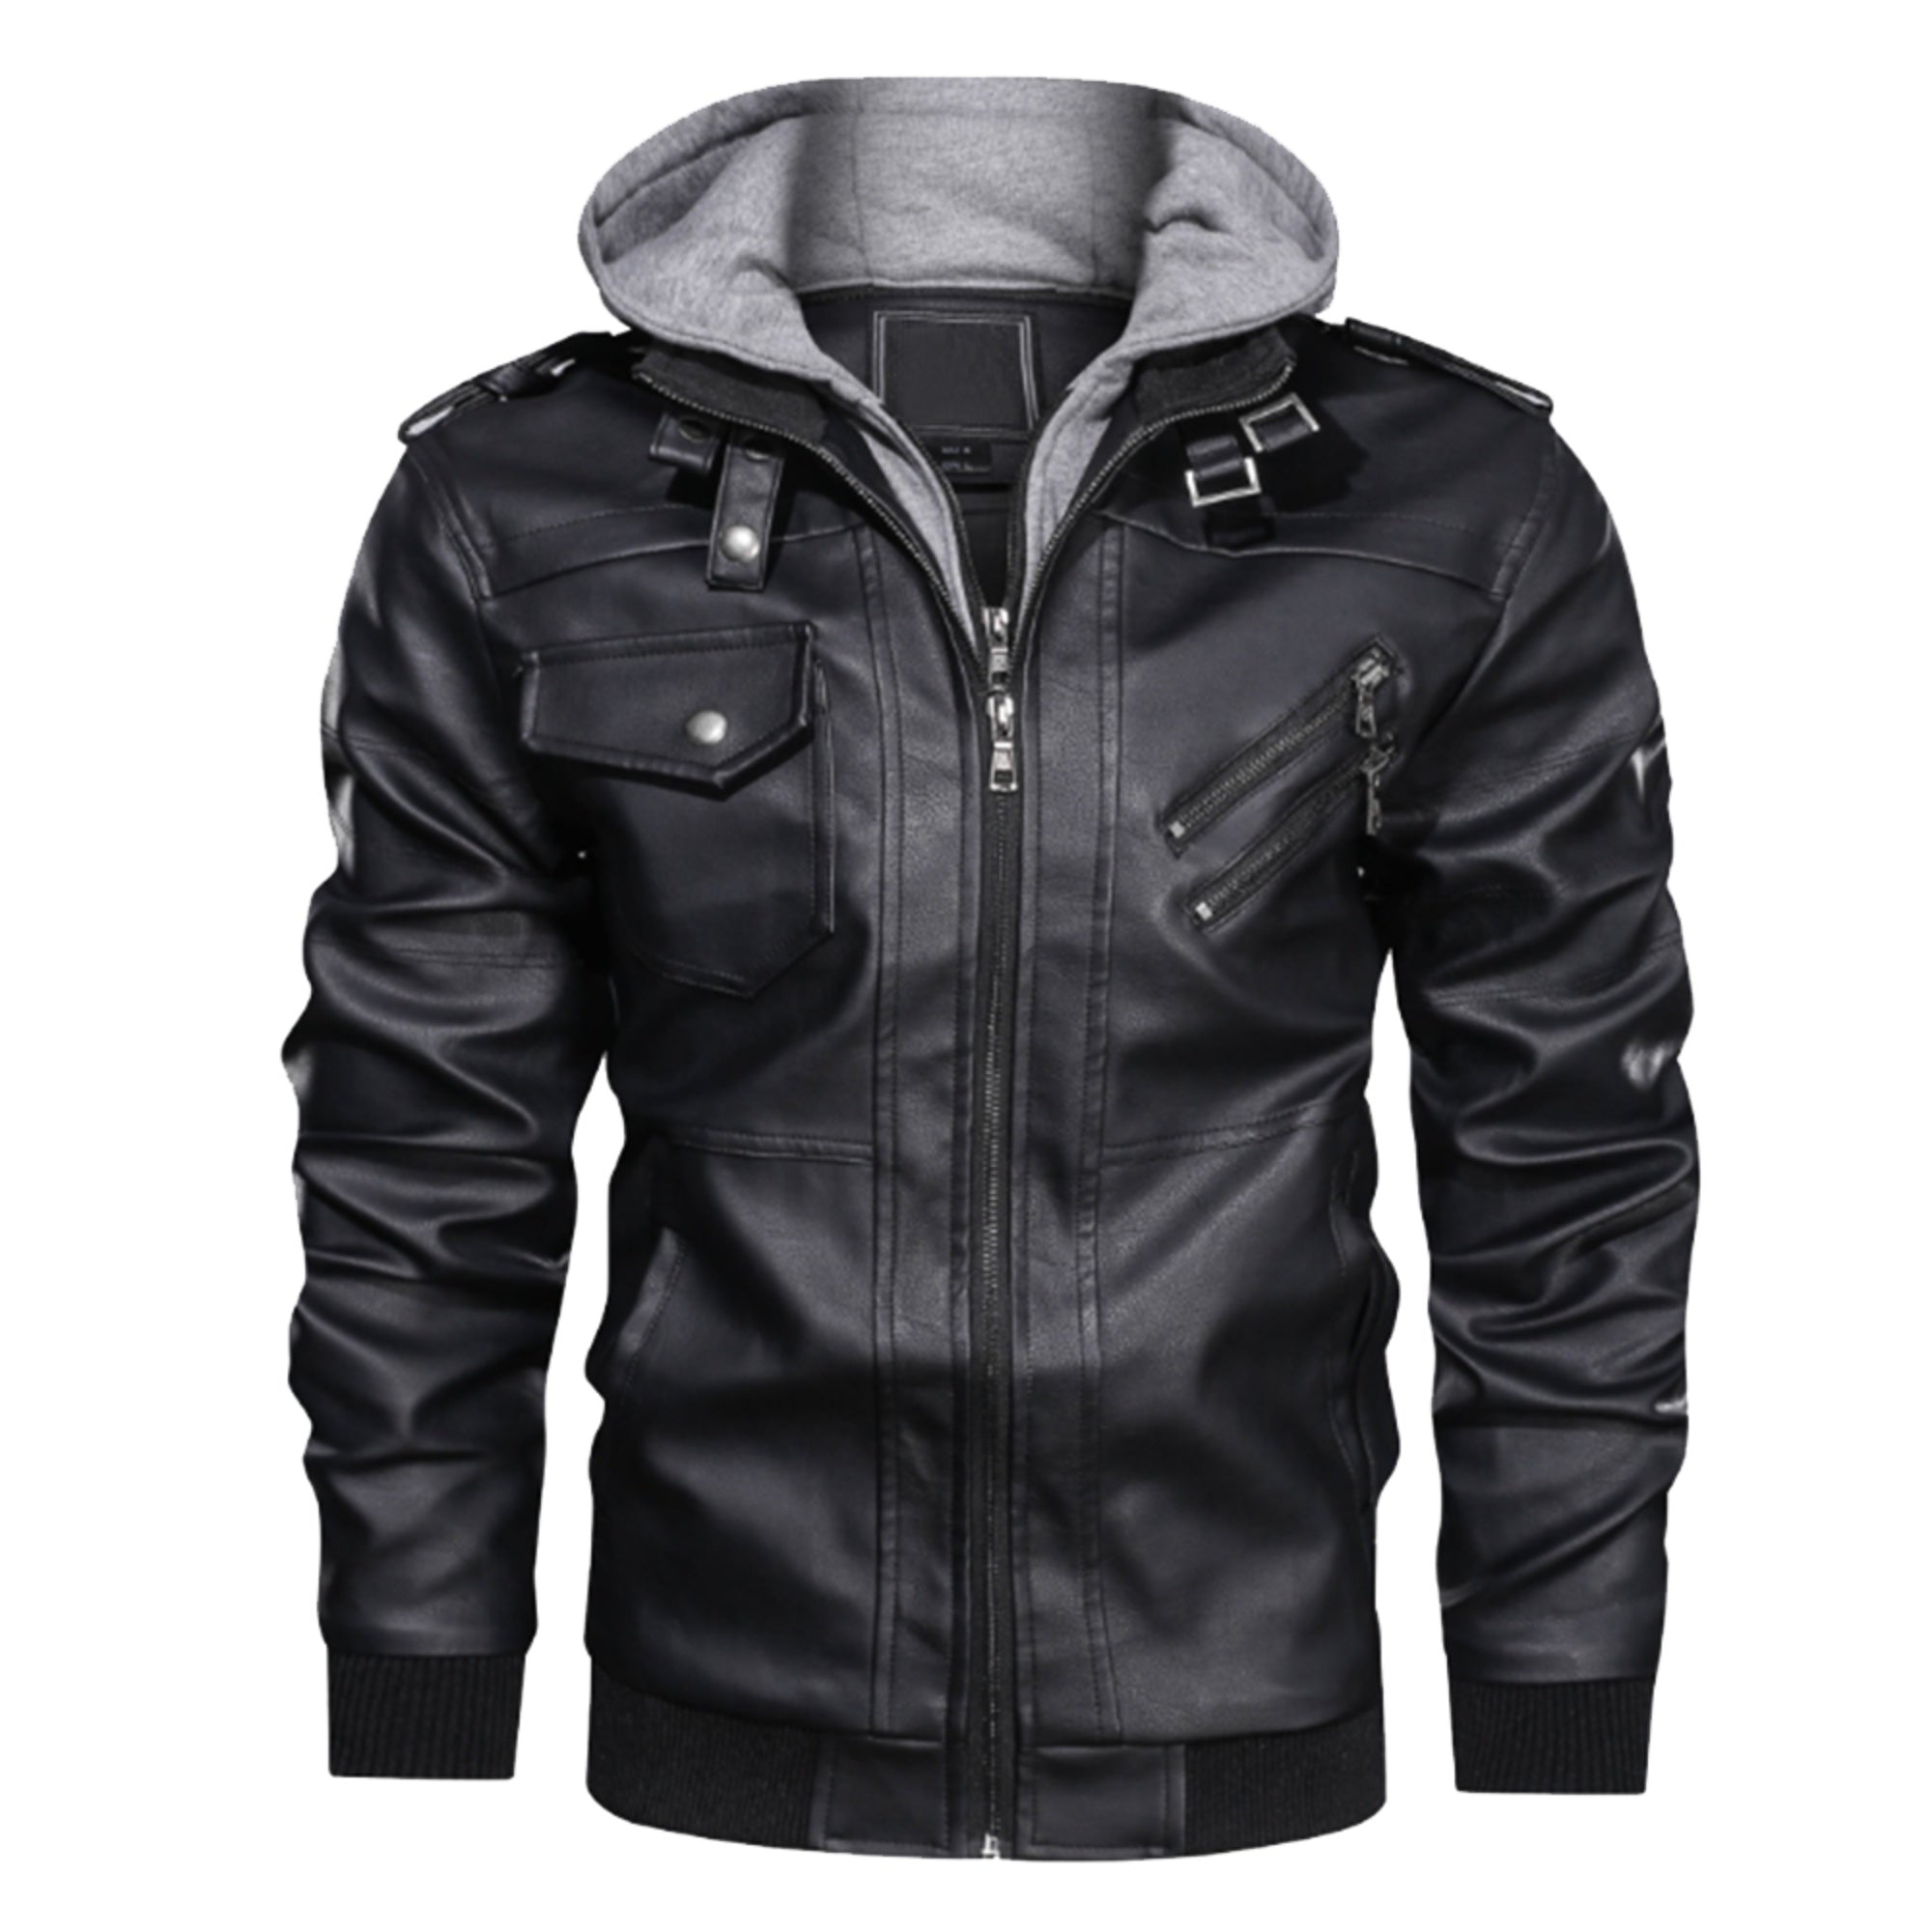 Personalized Leather Jacket With Hoodis